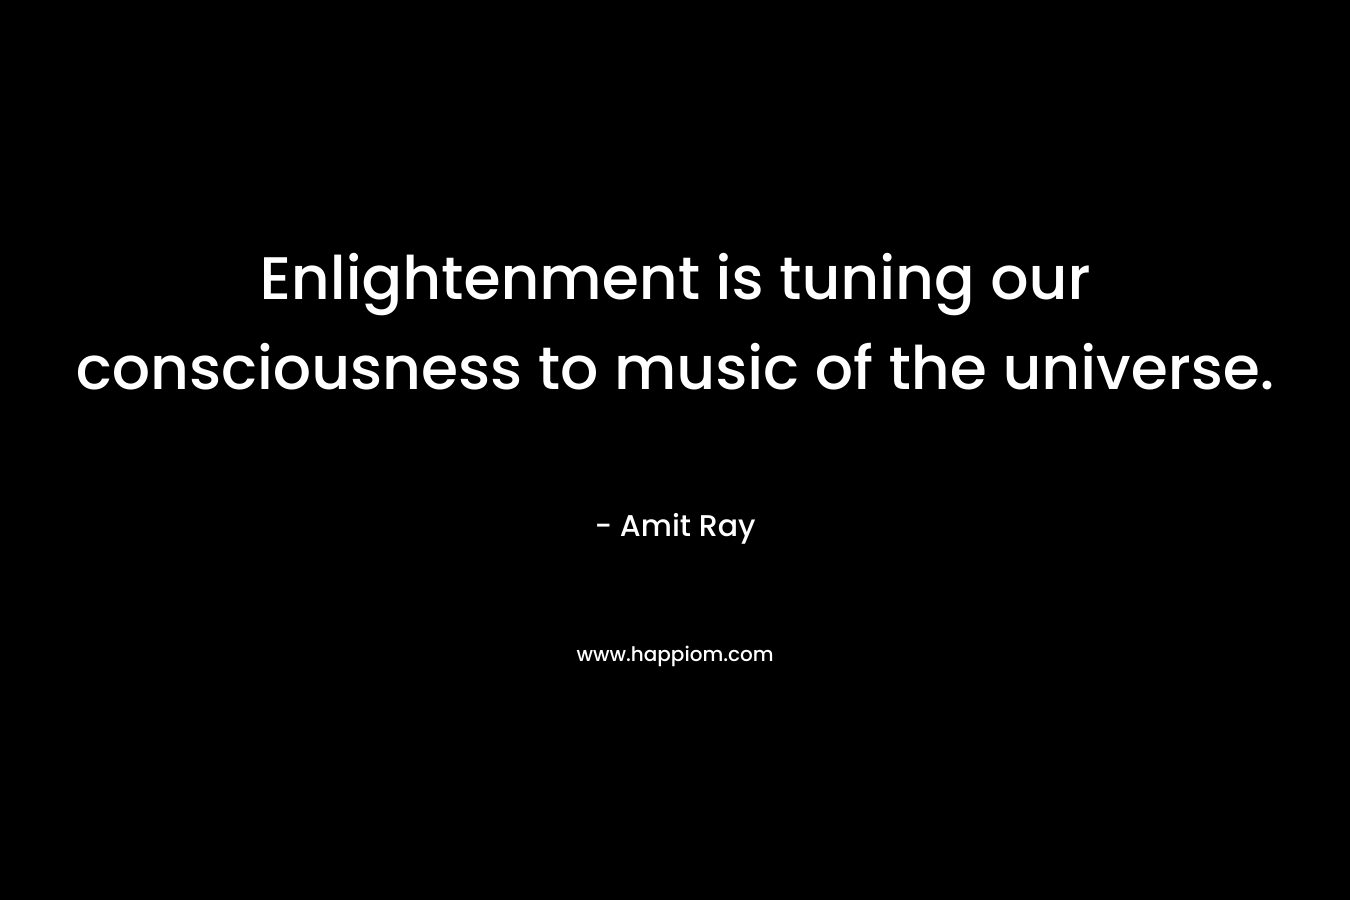 Enlightenment is tuning our consciousness to music of the universe.